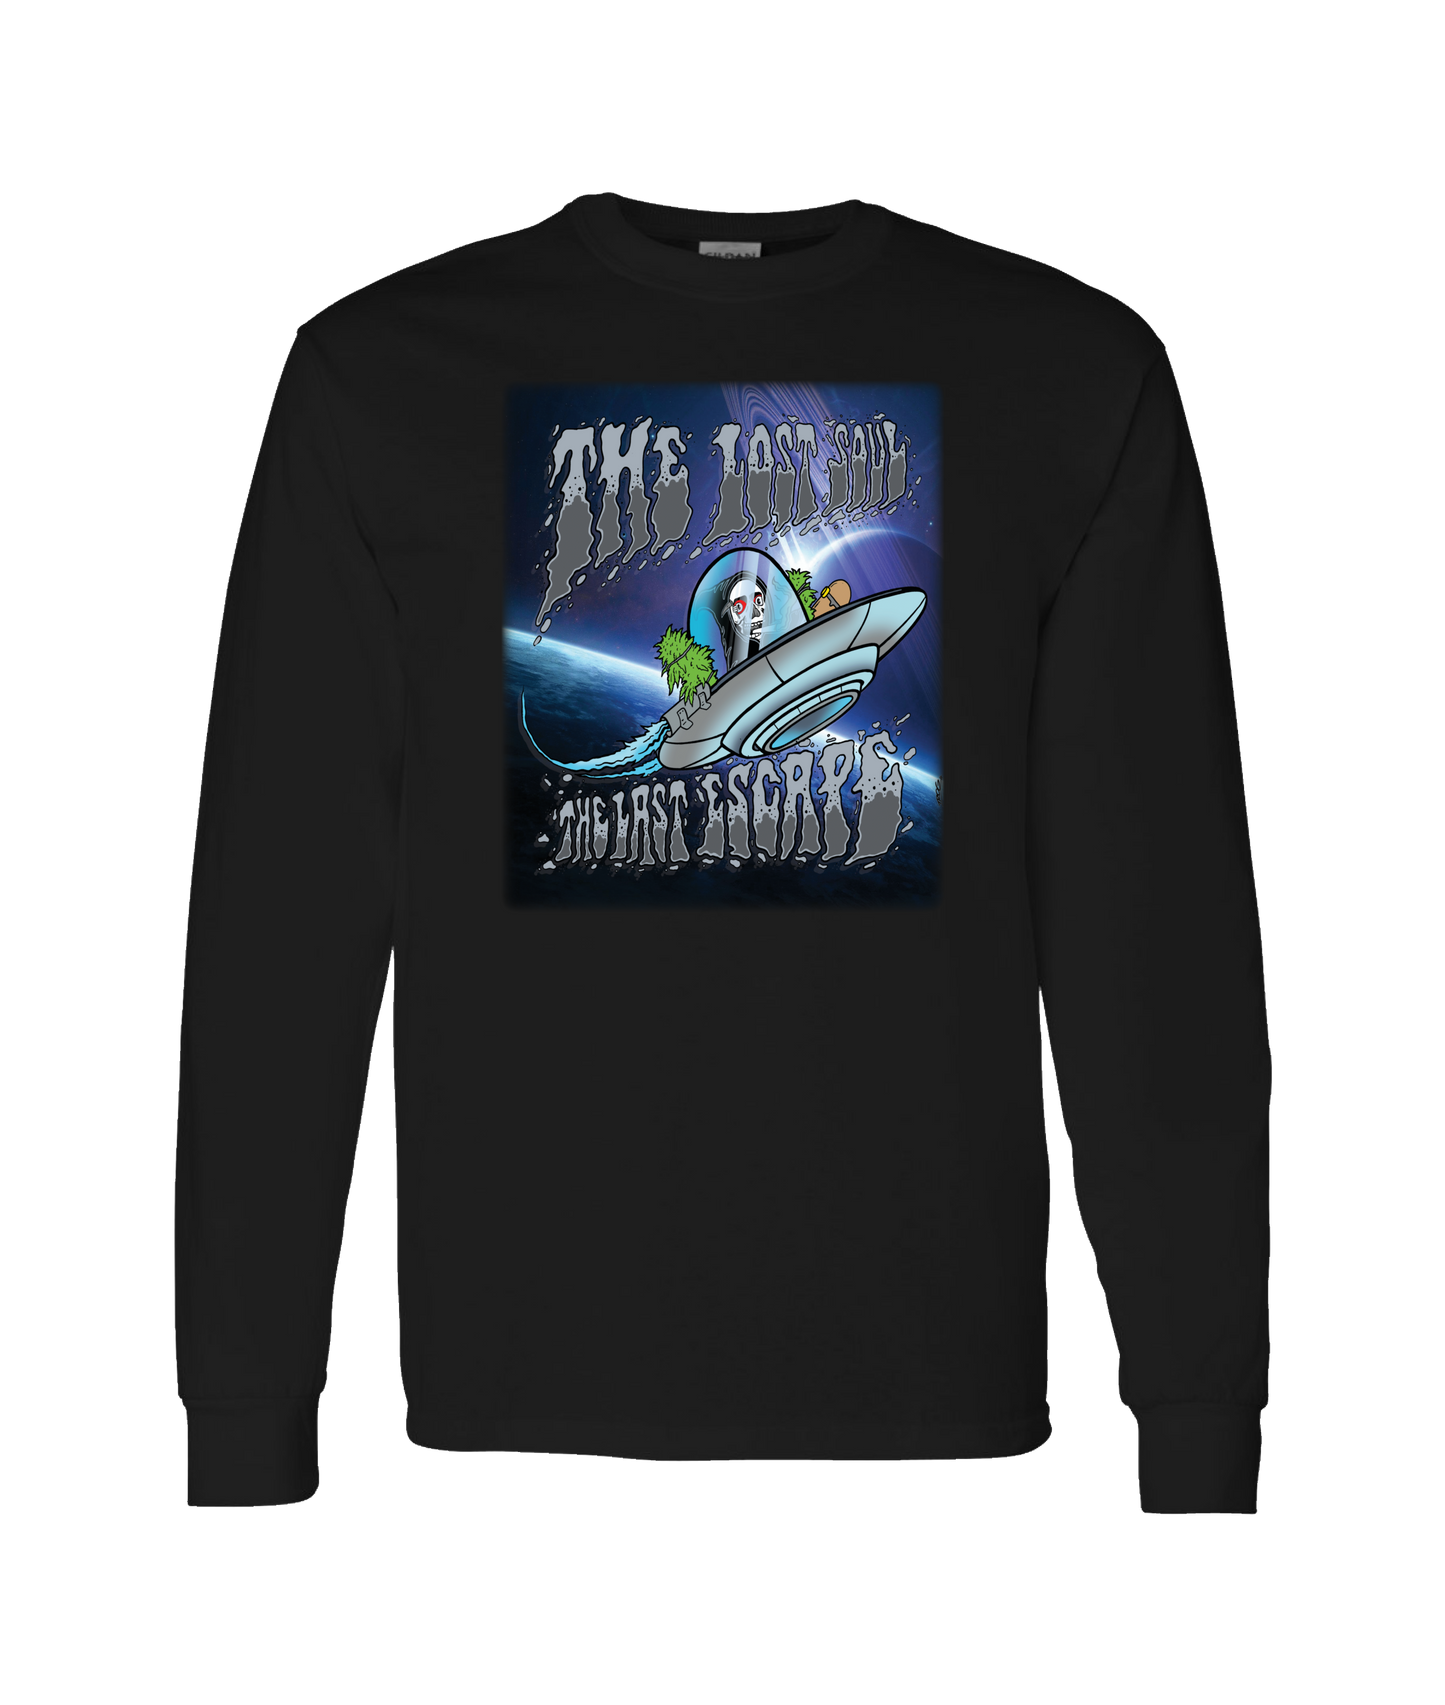 The Lost Soul - The Last Escape - Black Long Sleeve T